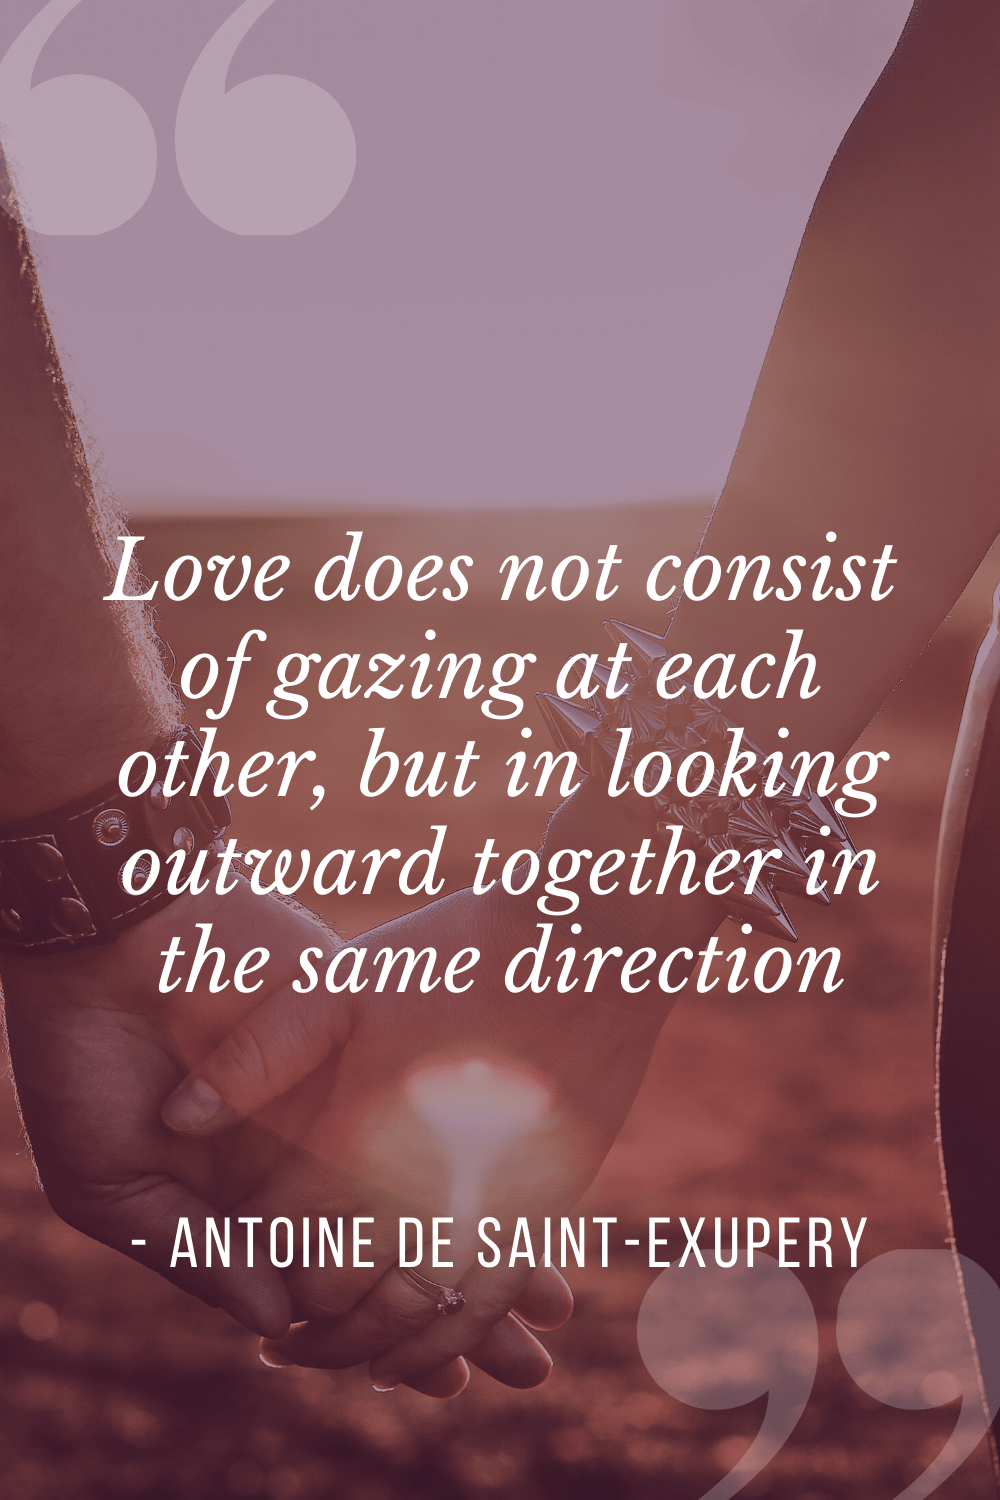 “Love does not consist of gazing at each other, but in looking outward together in the same direction”, Antoine de Saint-Exupéry